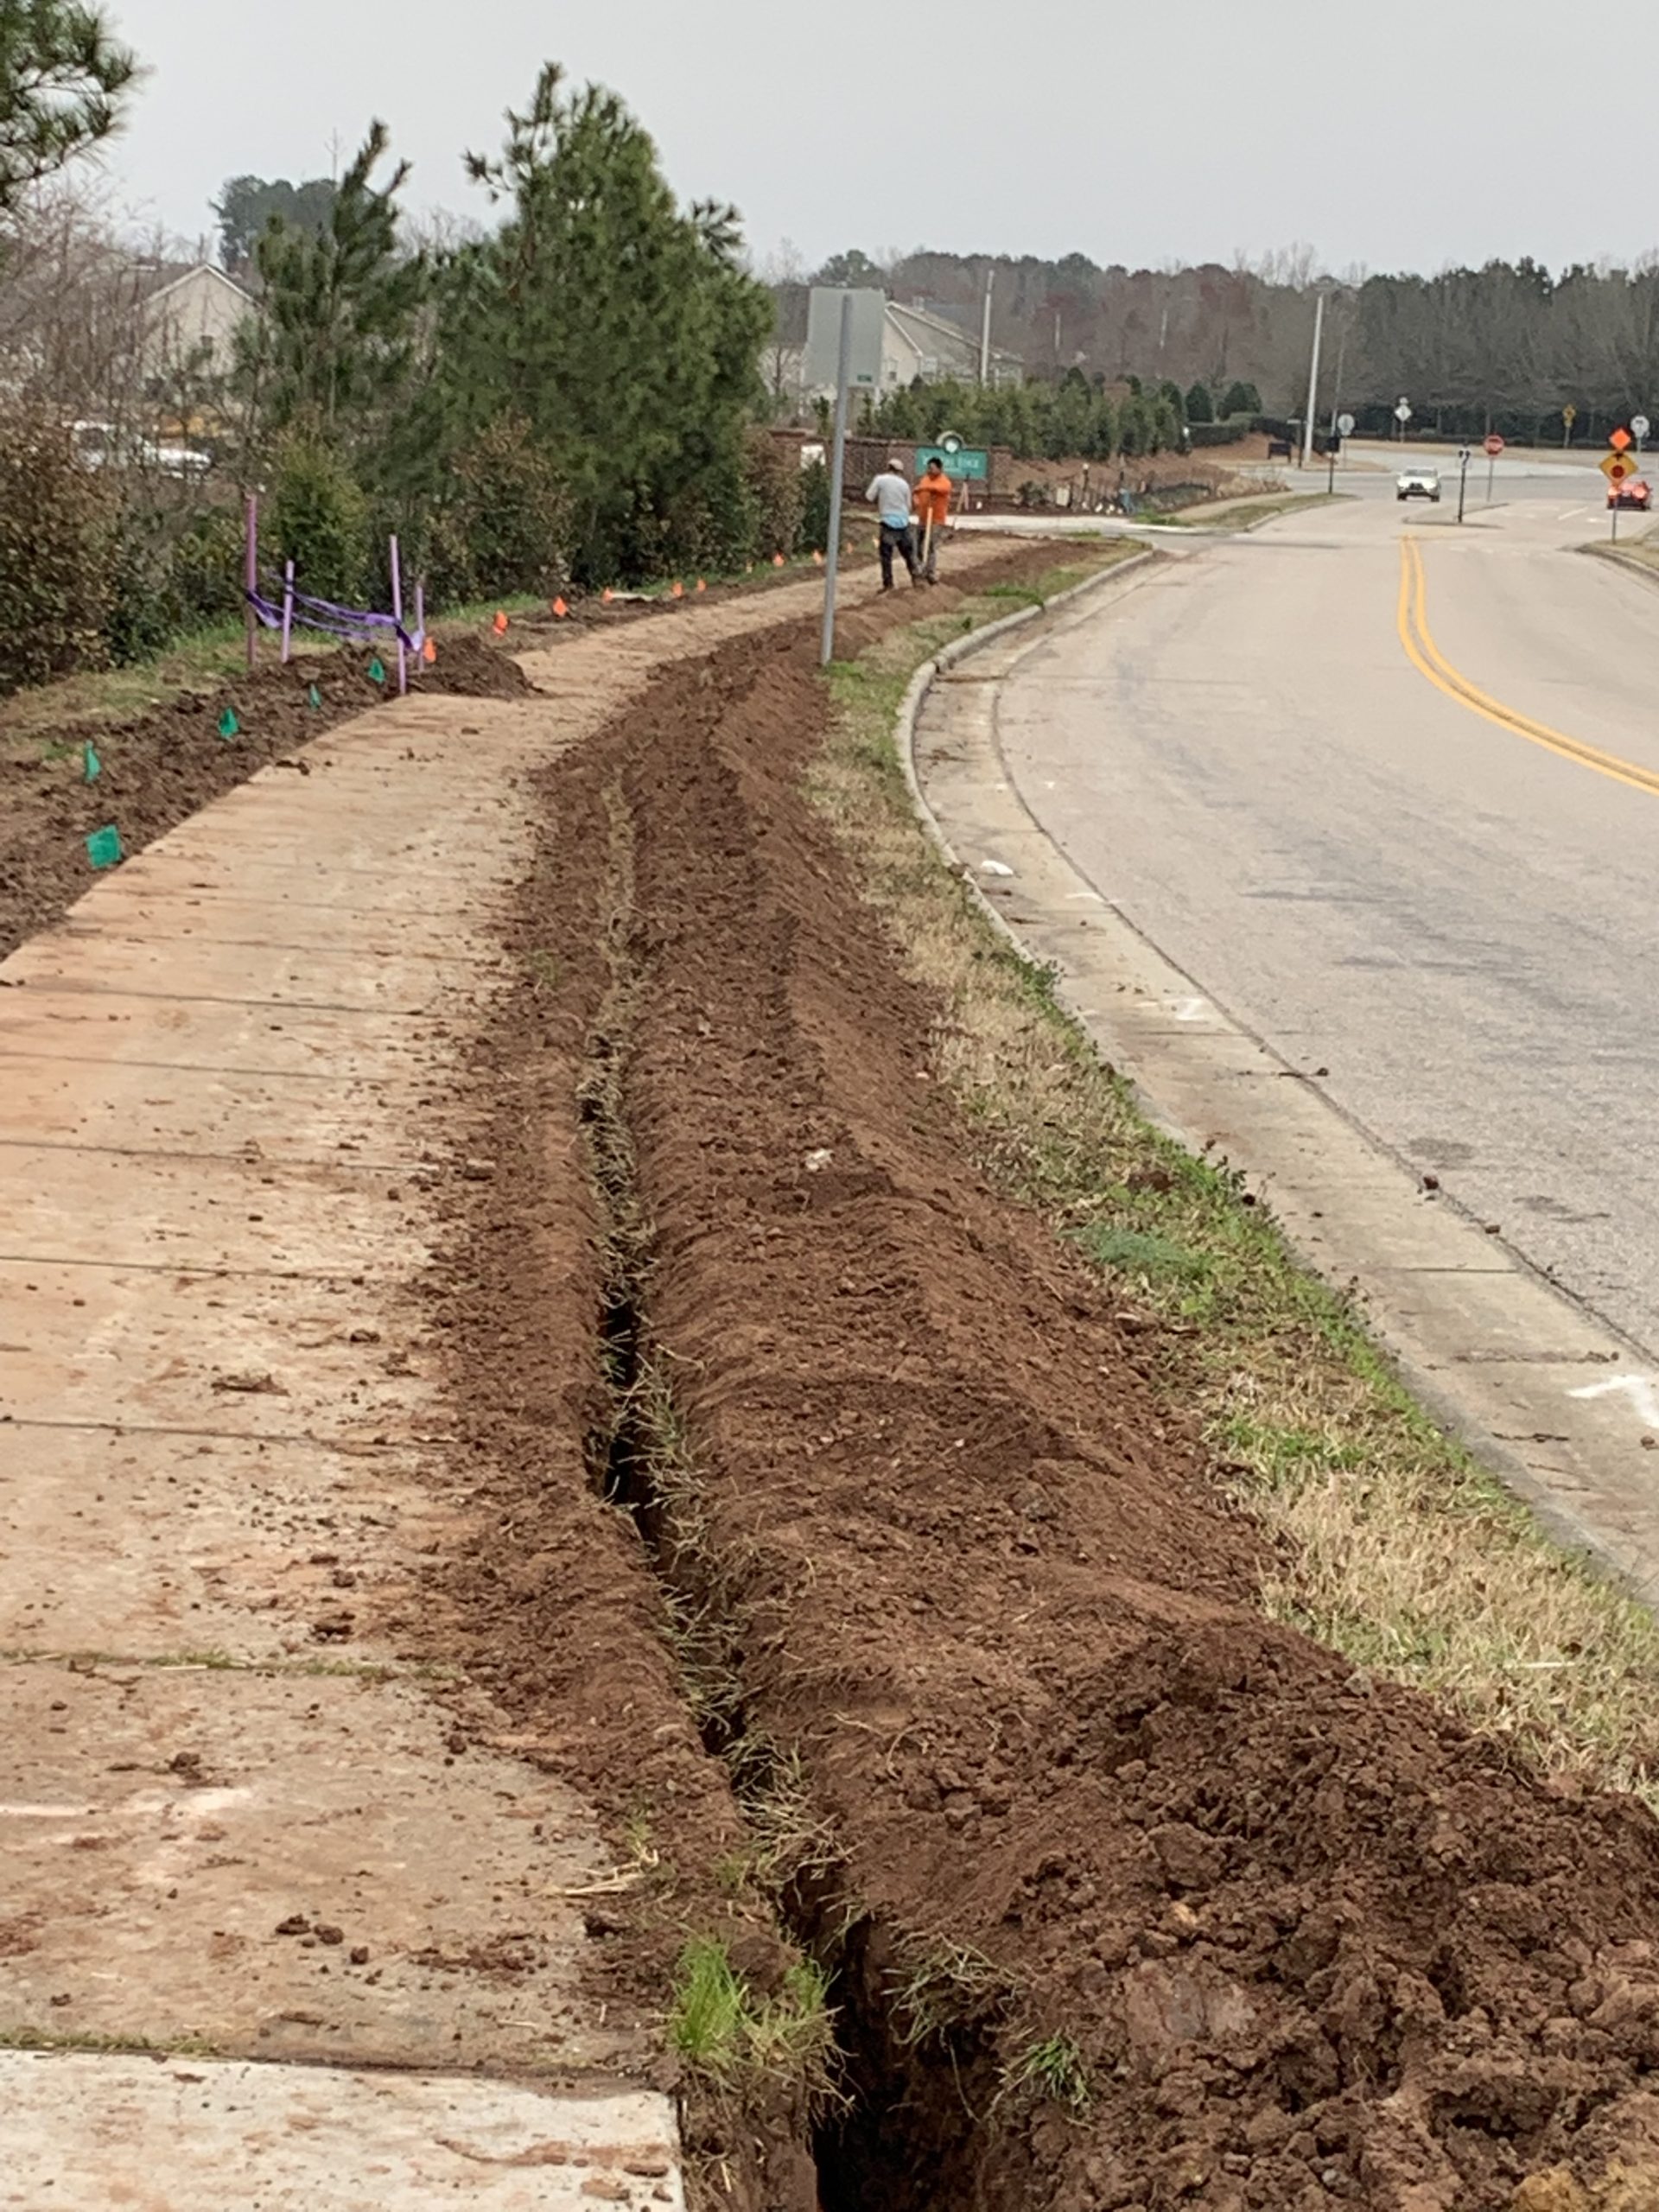 PROJECTS RF USA. Image 1. Excavated ditch for installation of new services (03/11/2019)